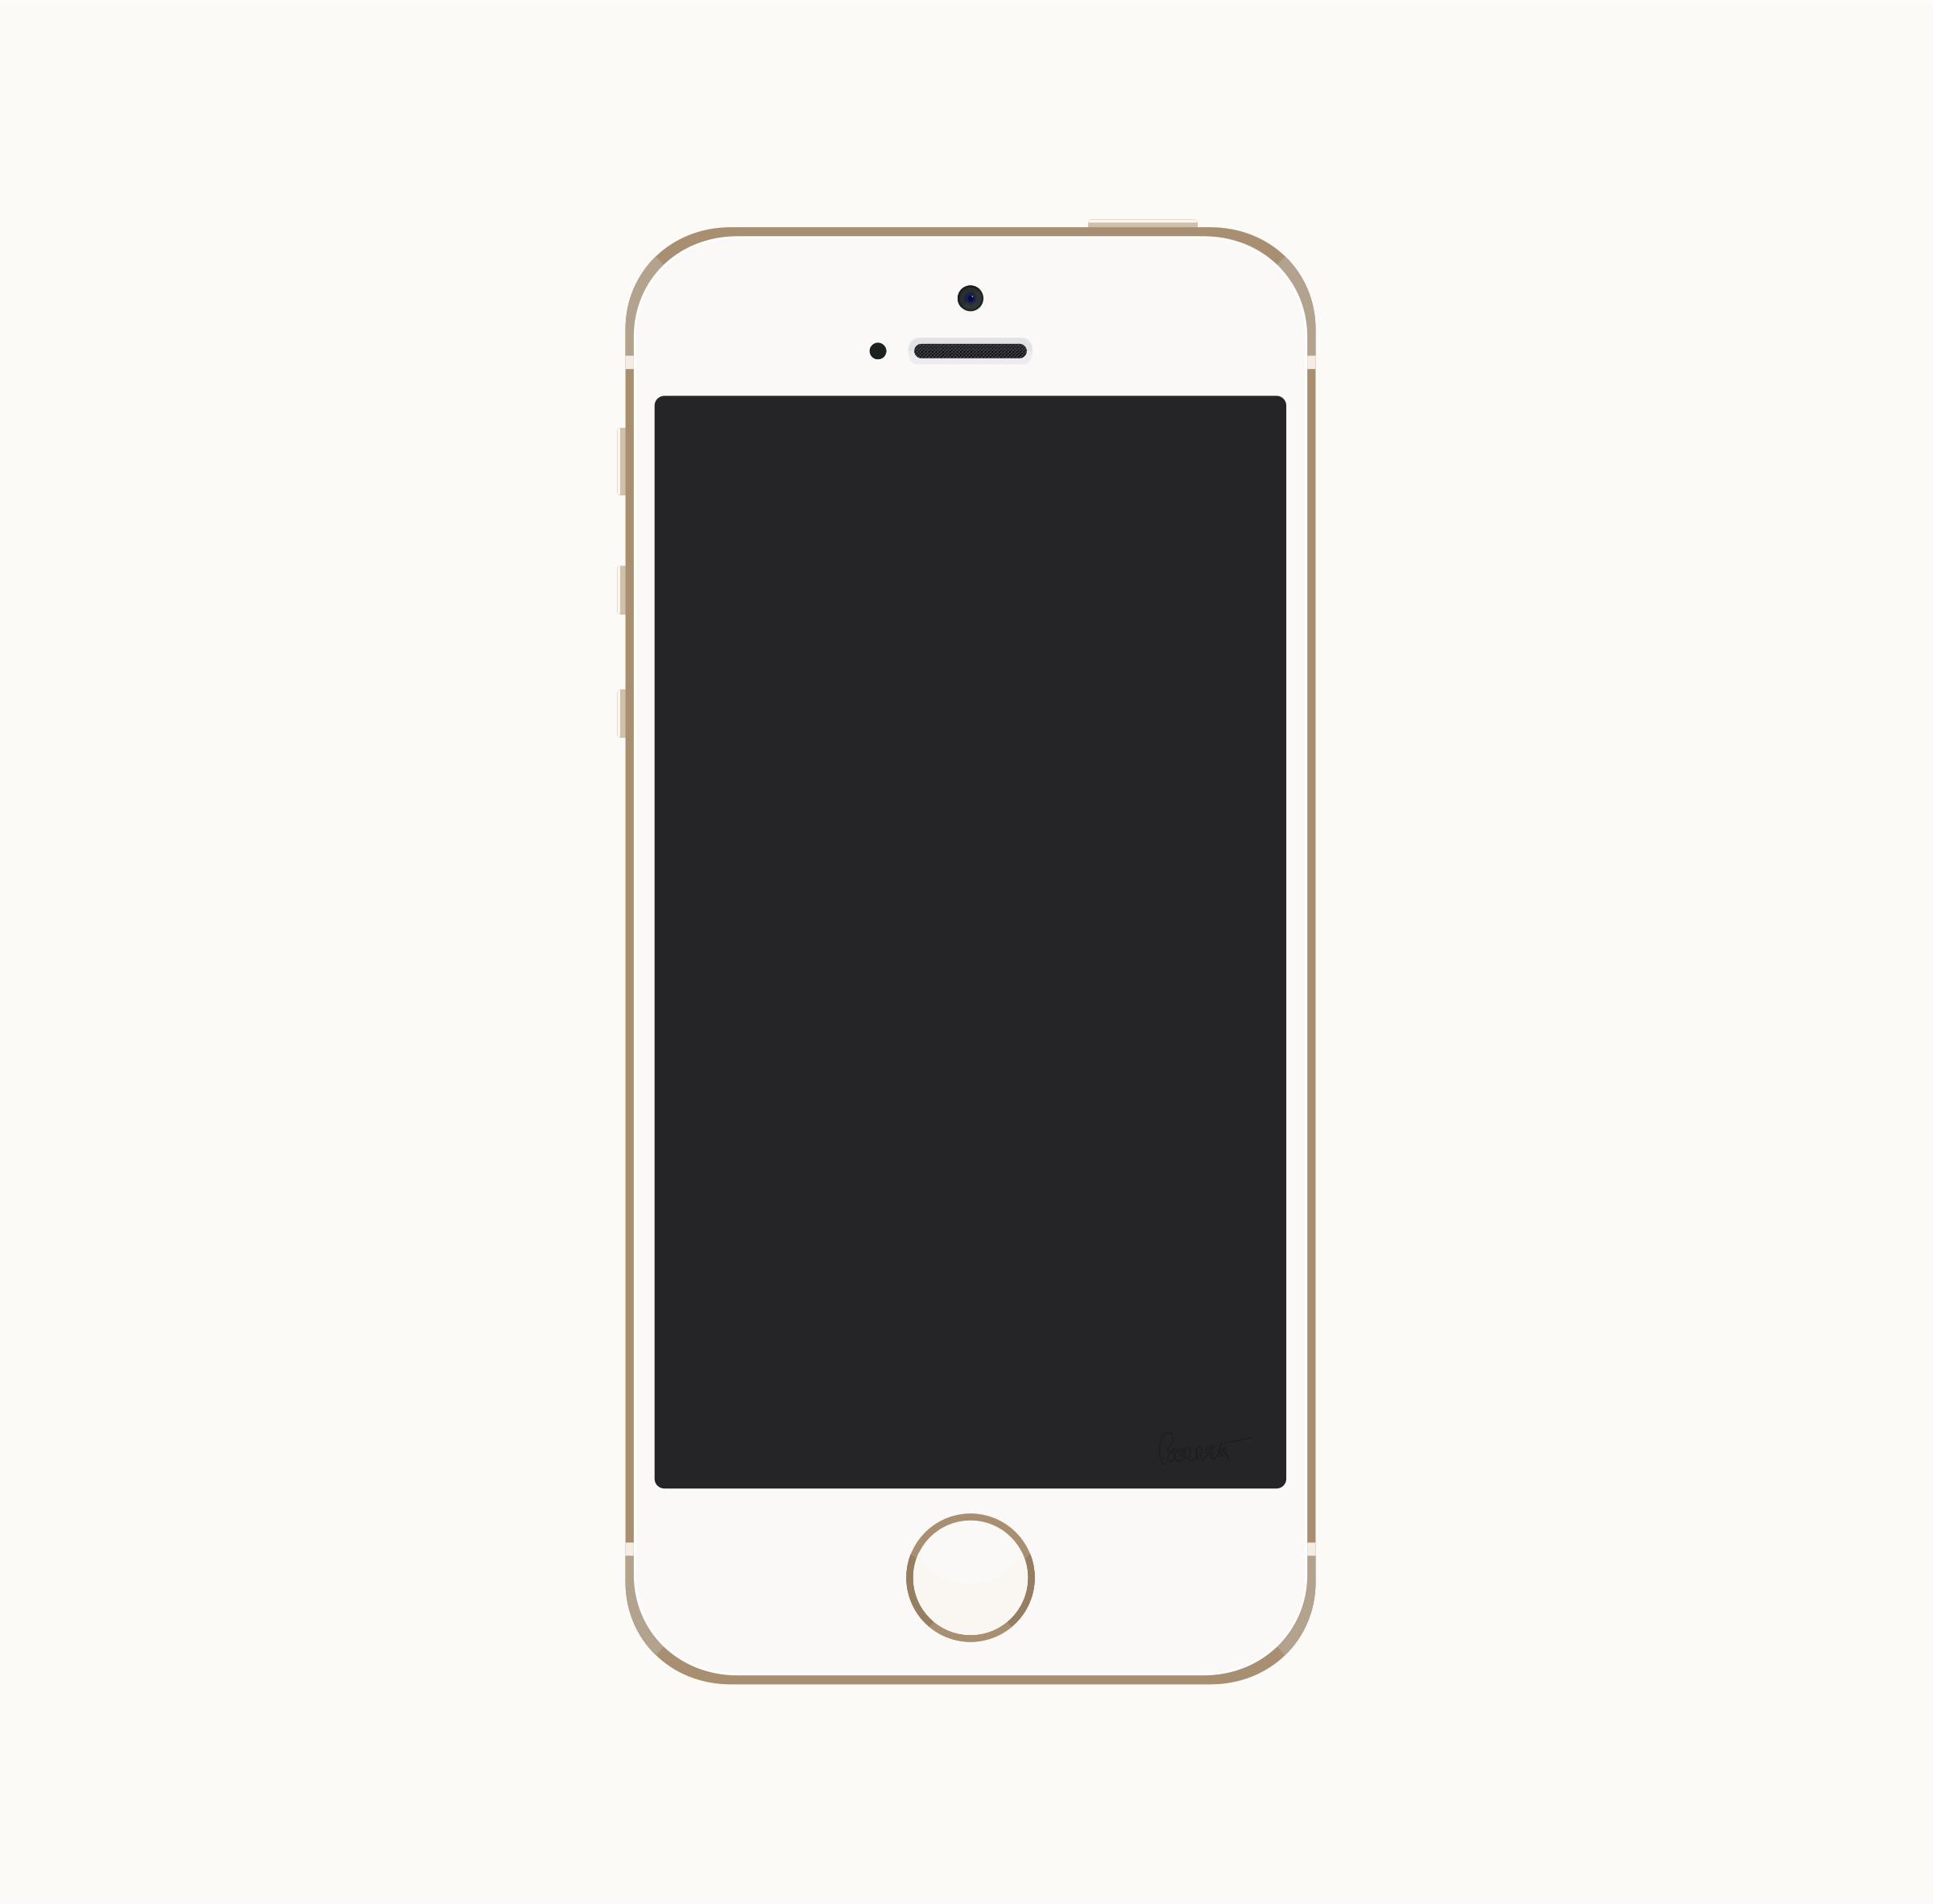 iphone clipart